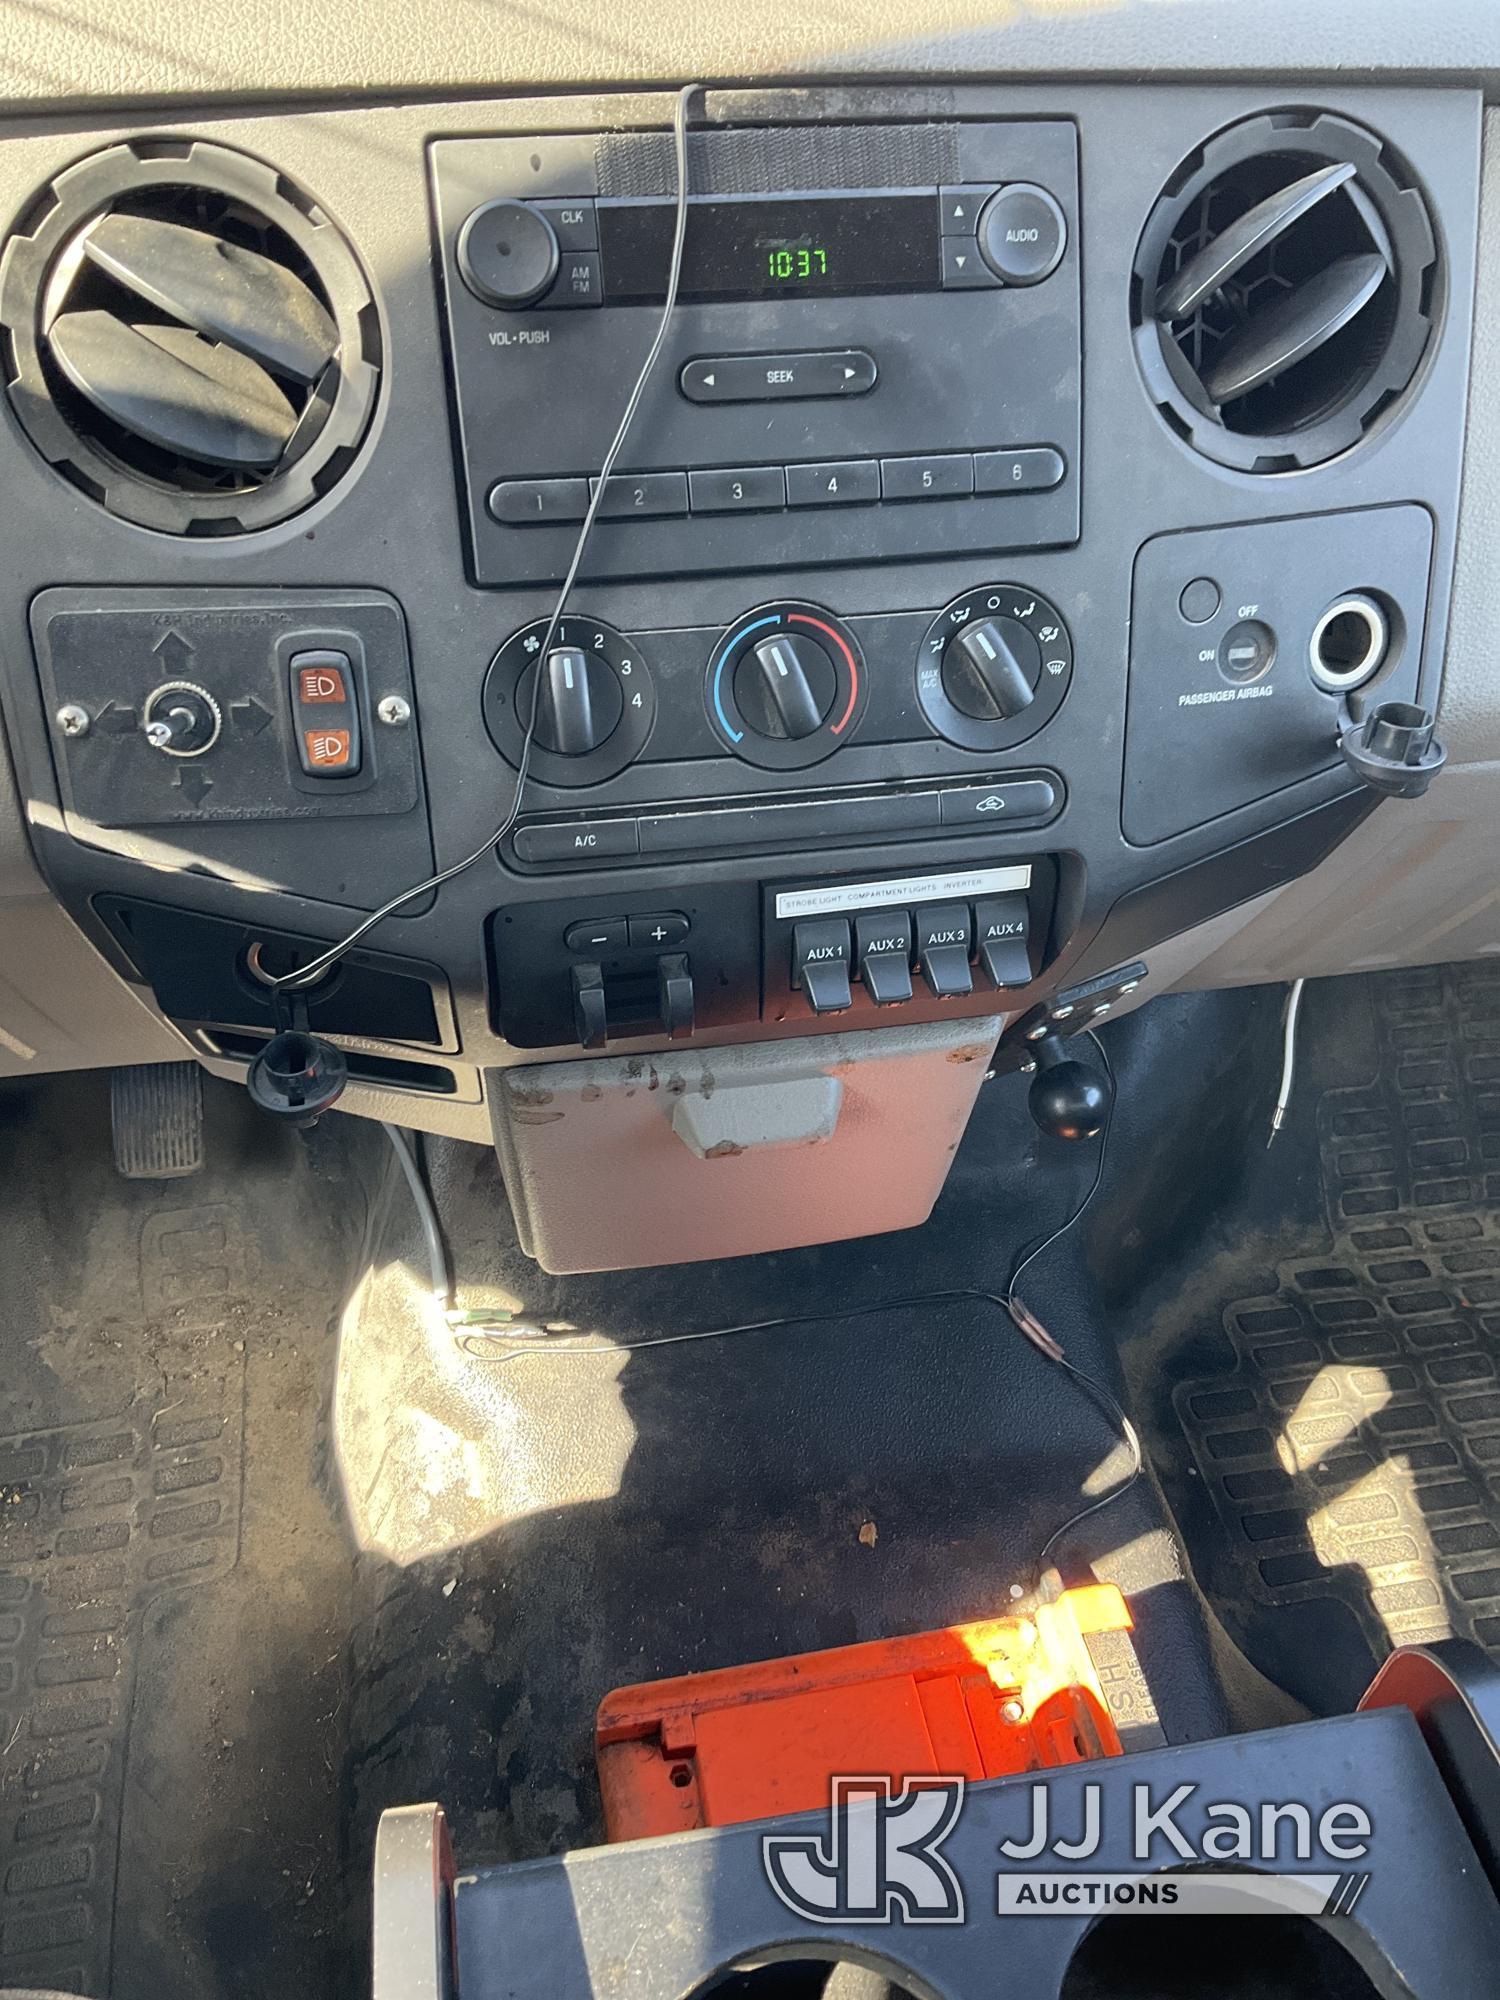 (South Beloit, IL) 2009 Ford F550 High Top Service Truck Runs & Moves